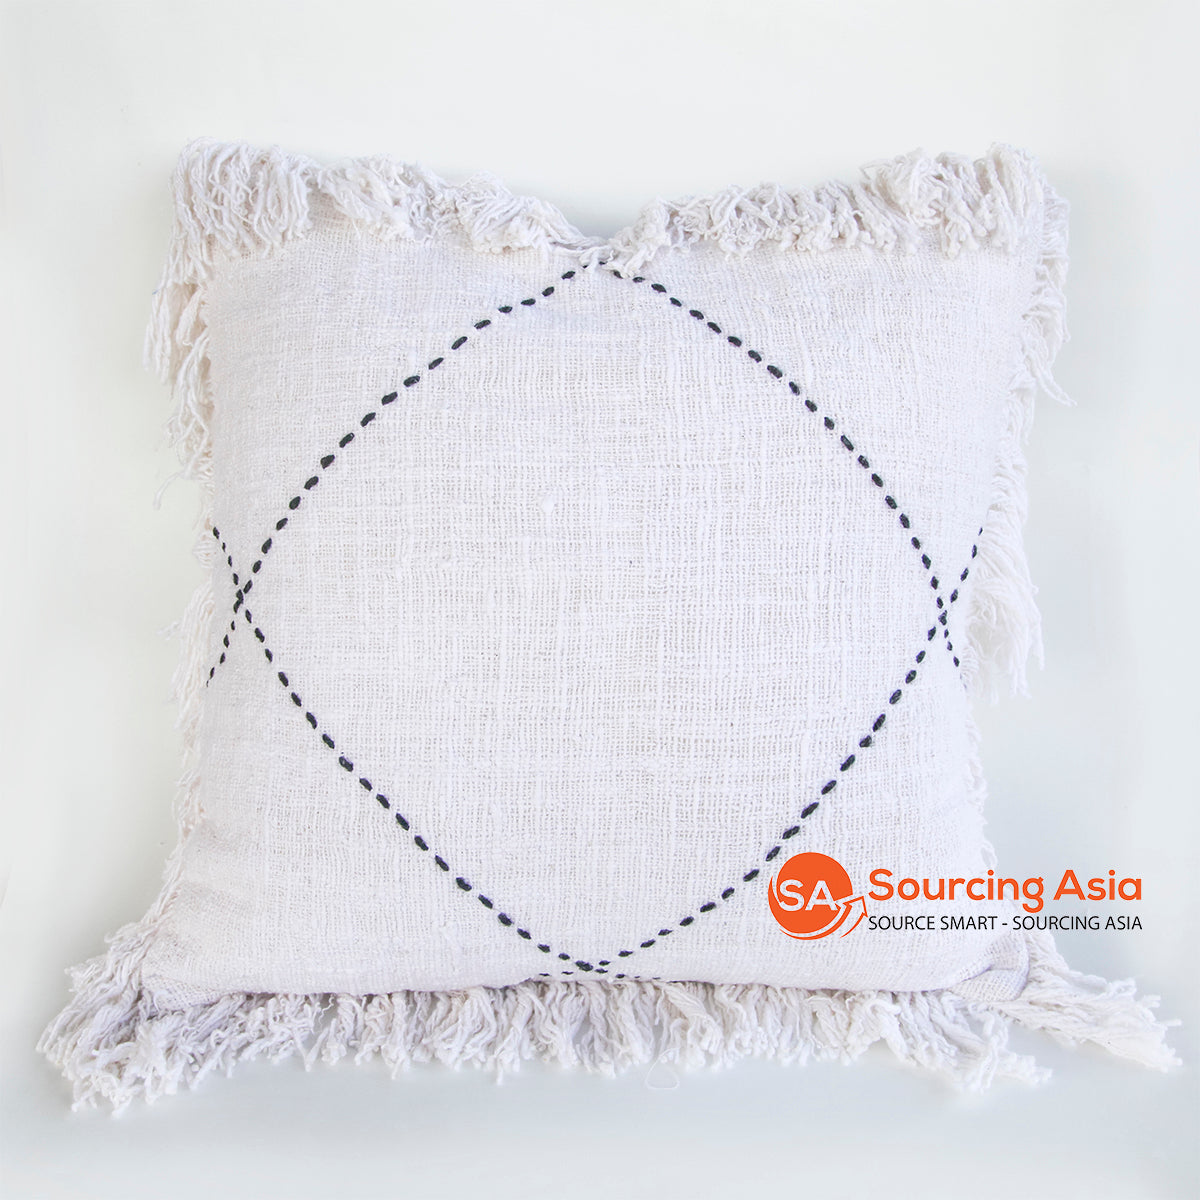 HIP025-1 NATURAL TUMANGGAL FABRIC SQUARE COVER CUSHION WITH BLACK HAND-STITCHED  AND FRINGE